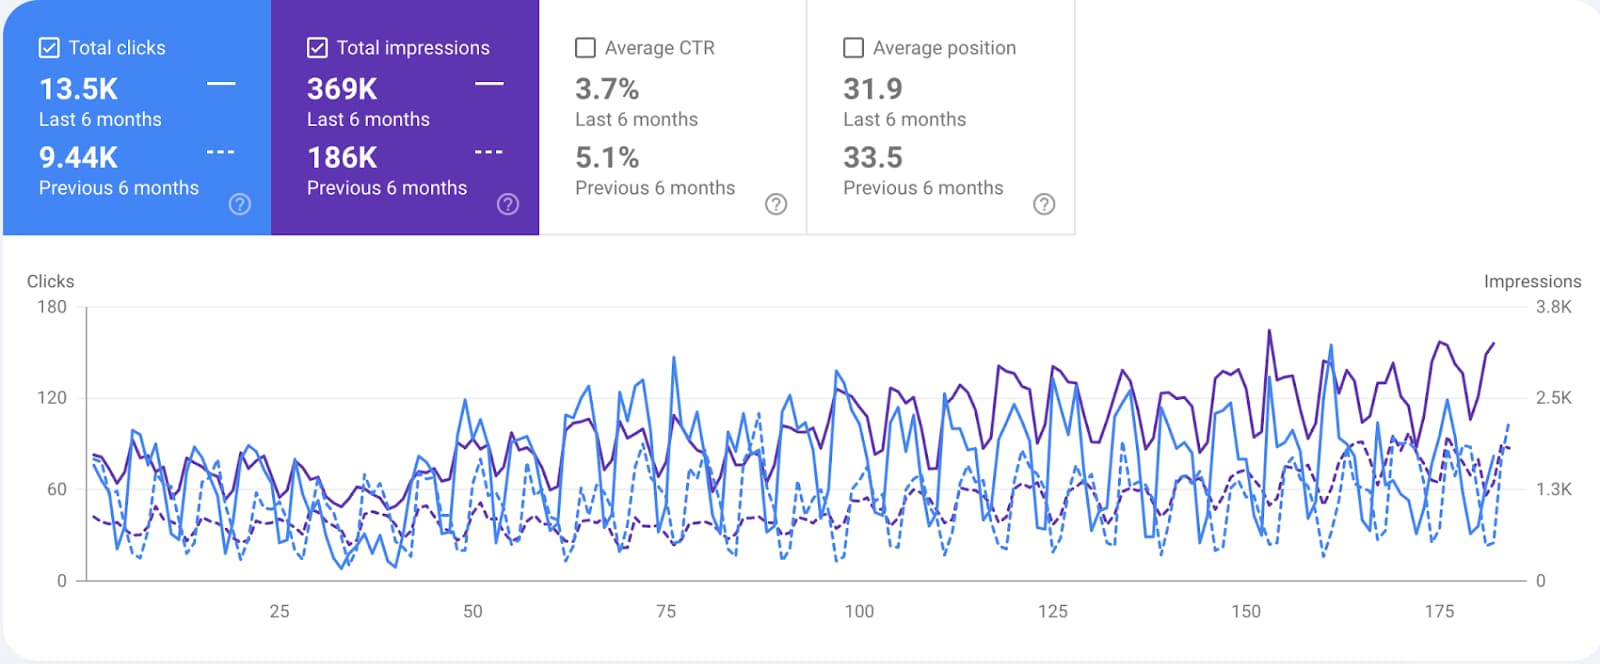 Comparison of the number of clicks, impressions, CTR (Click-Through Rate), and average position